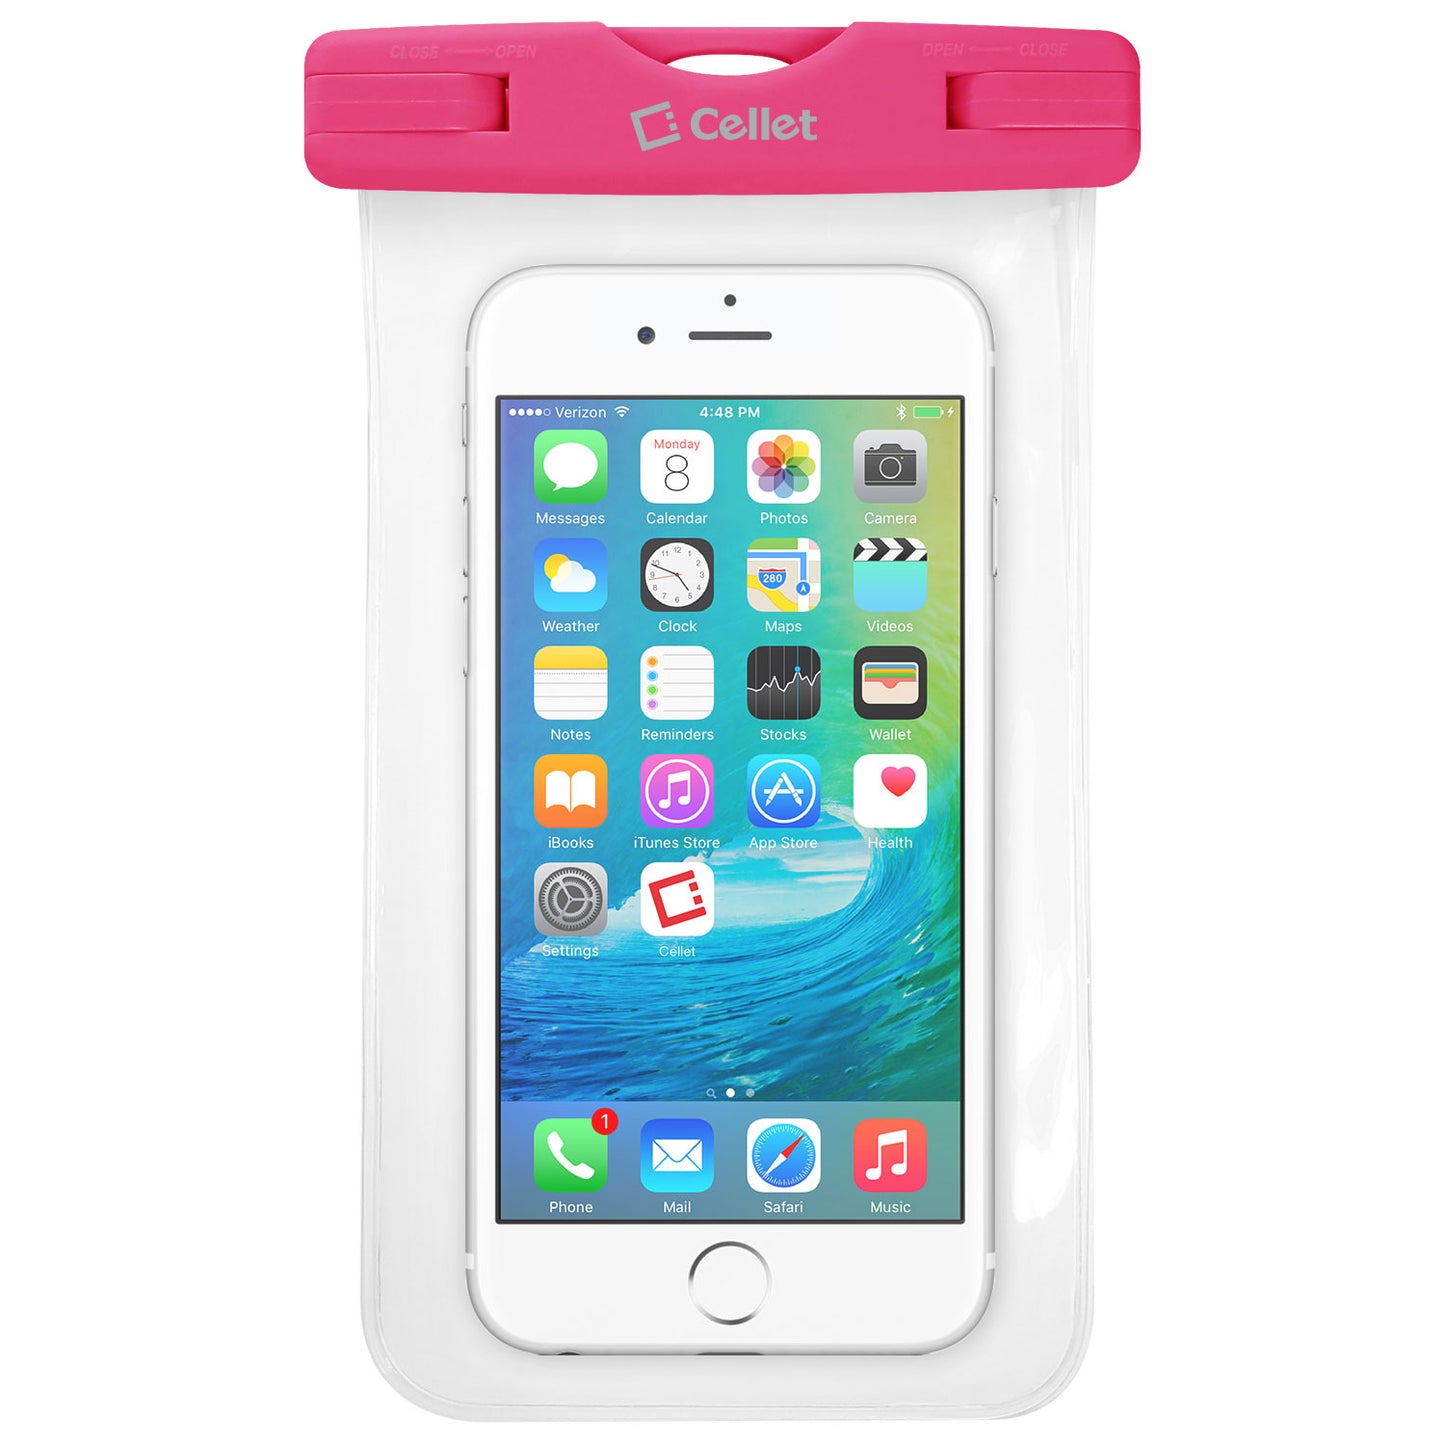 WATER1PK - Cellet Universal IPX8 Waterproof Case for Apple iPhone 7 Plus, Large Smartphones, Digital Cameras, MP3 Players and More - Pink